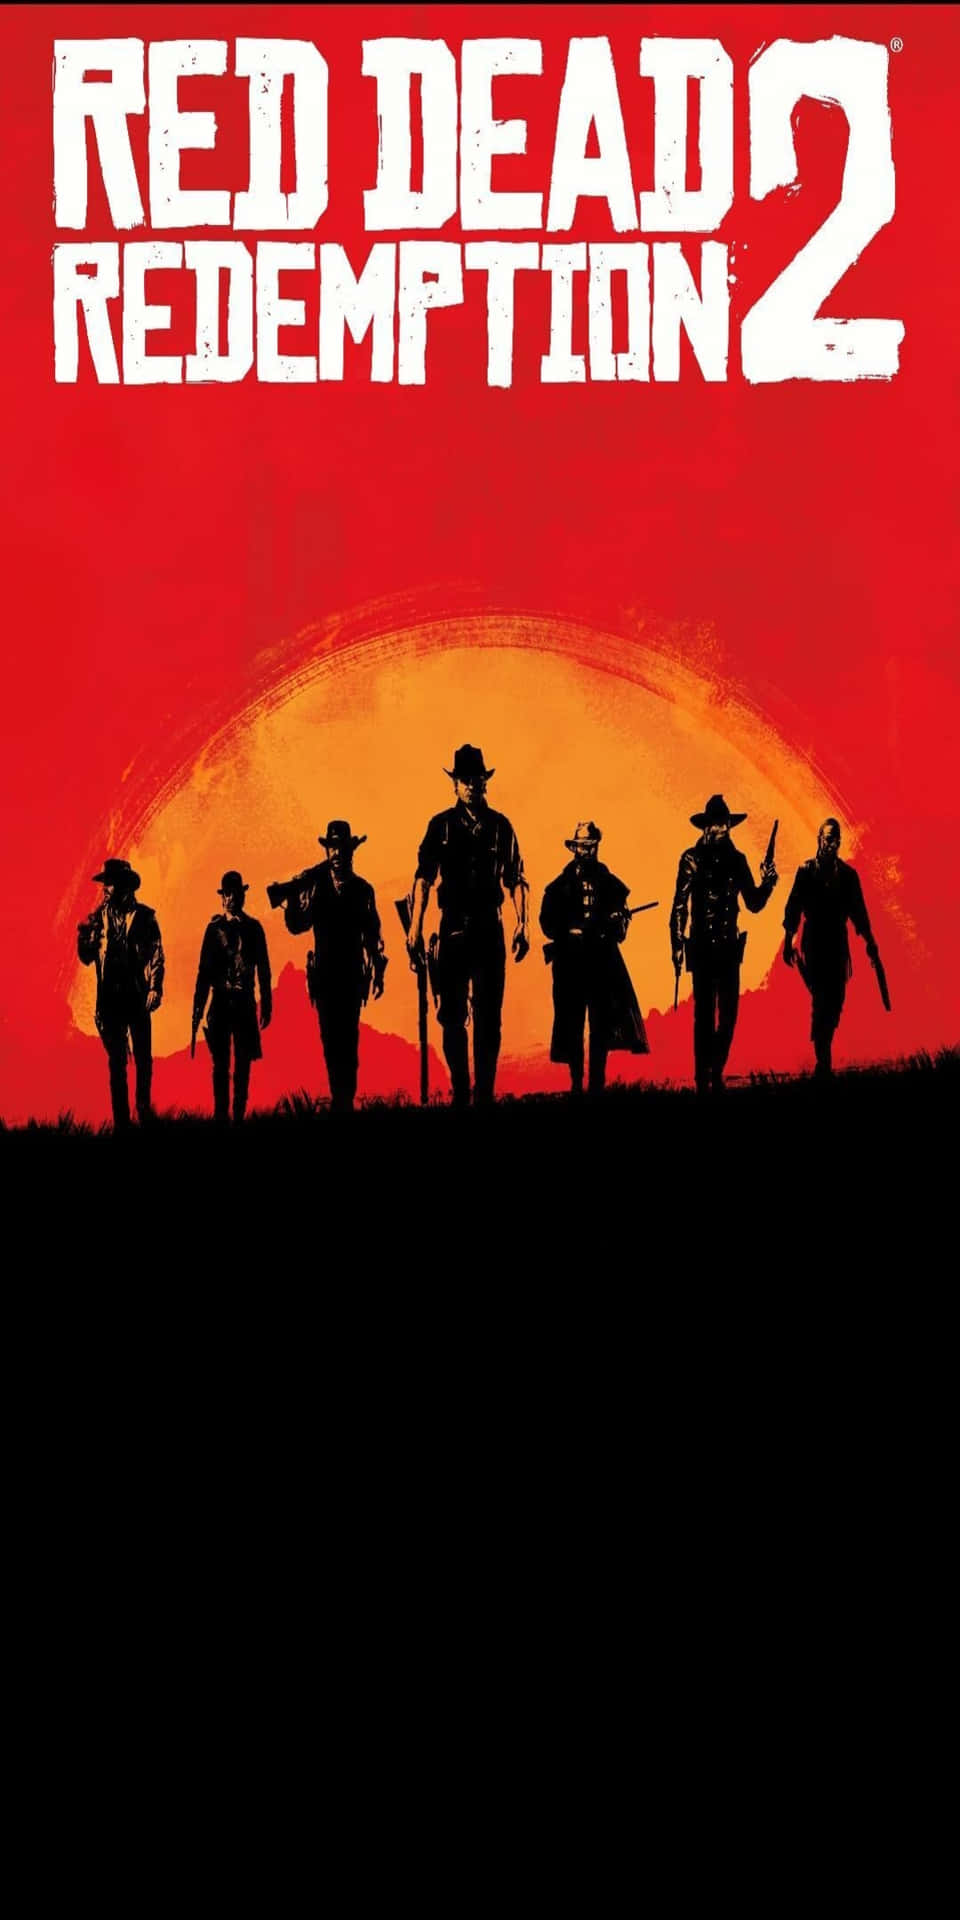 Pixel 3 Red Dead Redemption 2 Background Red Poster With Silhouettes Of Cowboys